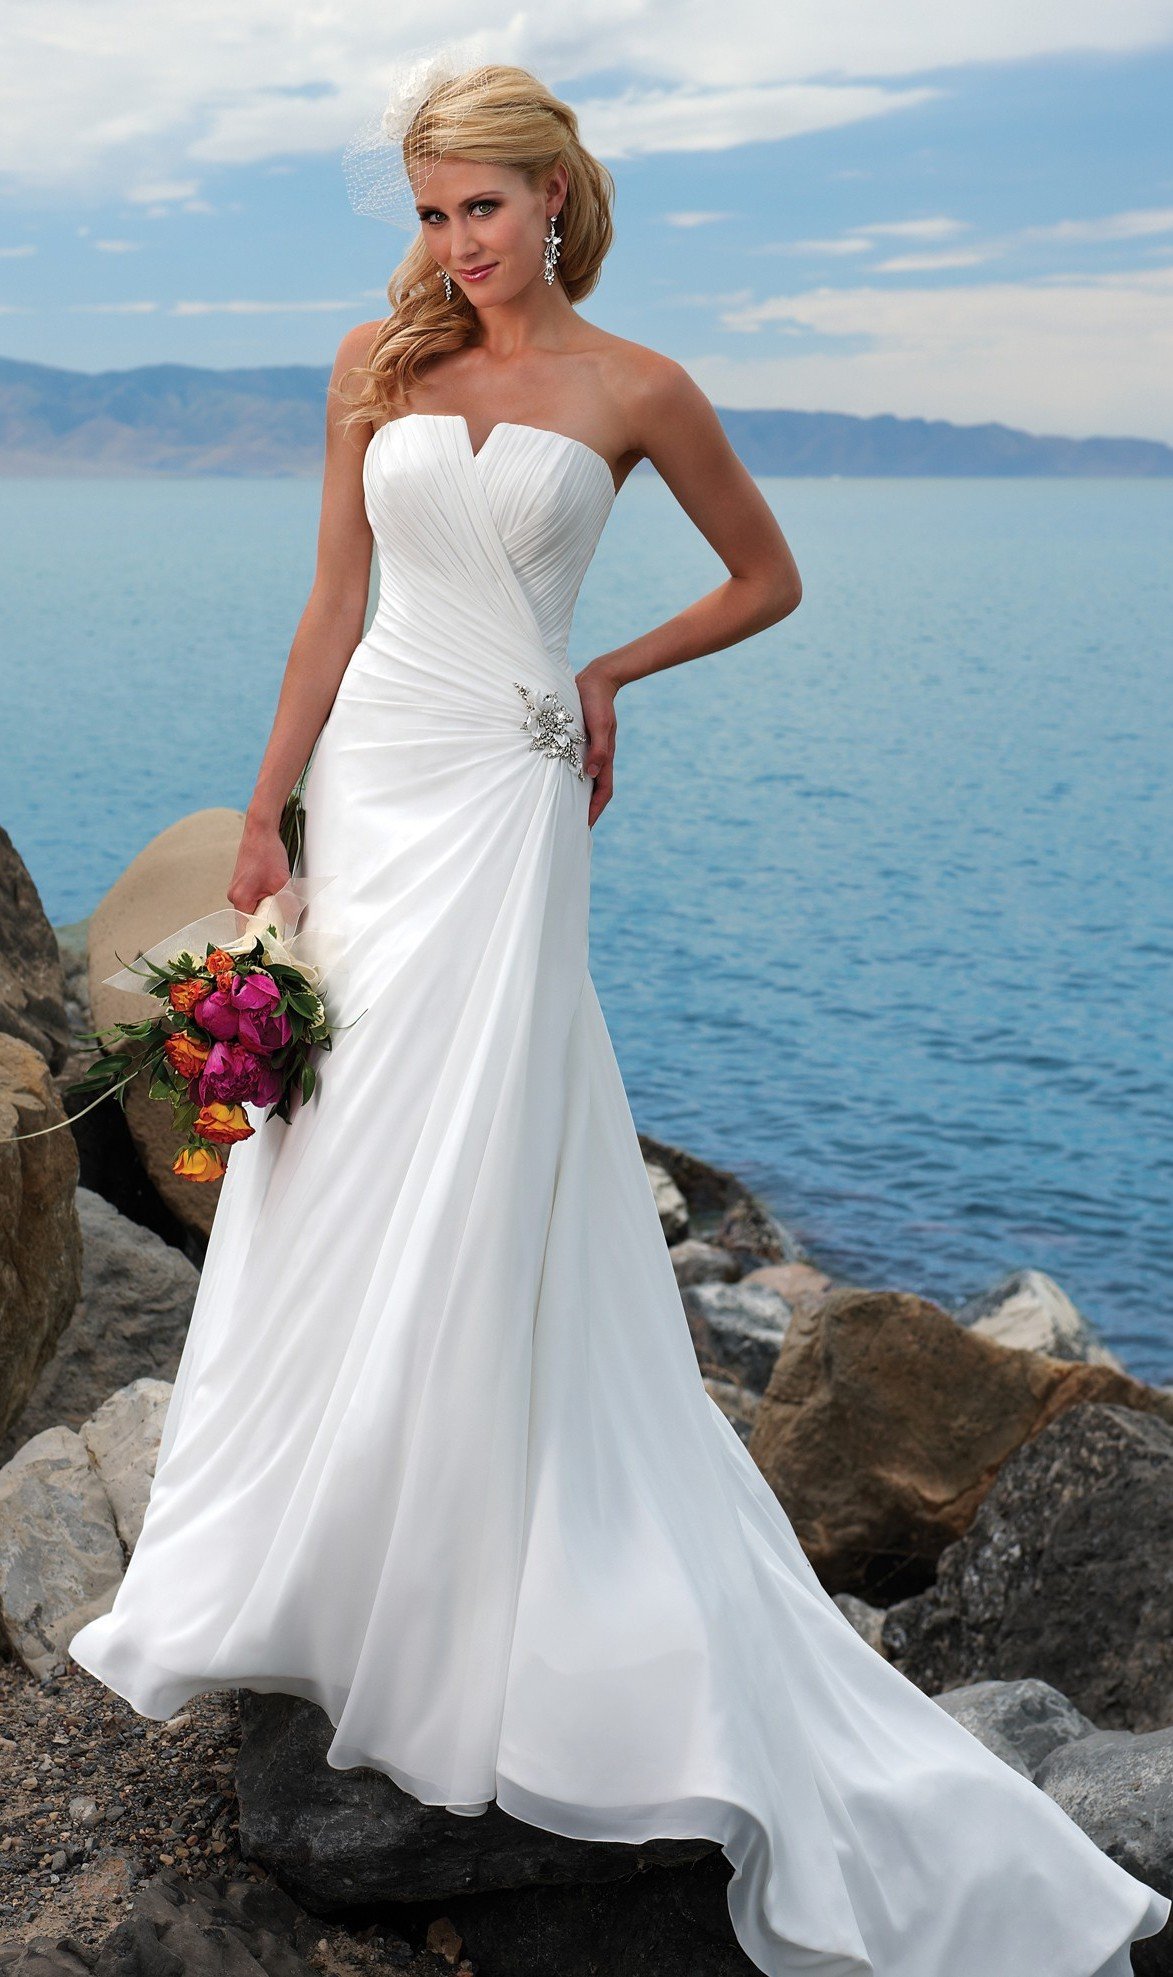 Great Strapless Beach Wedding Dresses Check it out now | goldweddingdress3